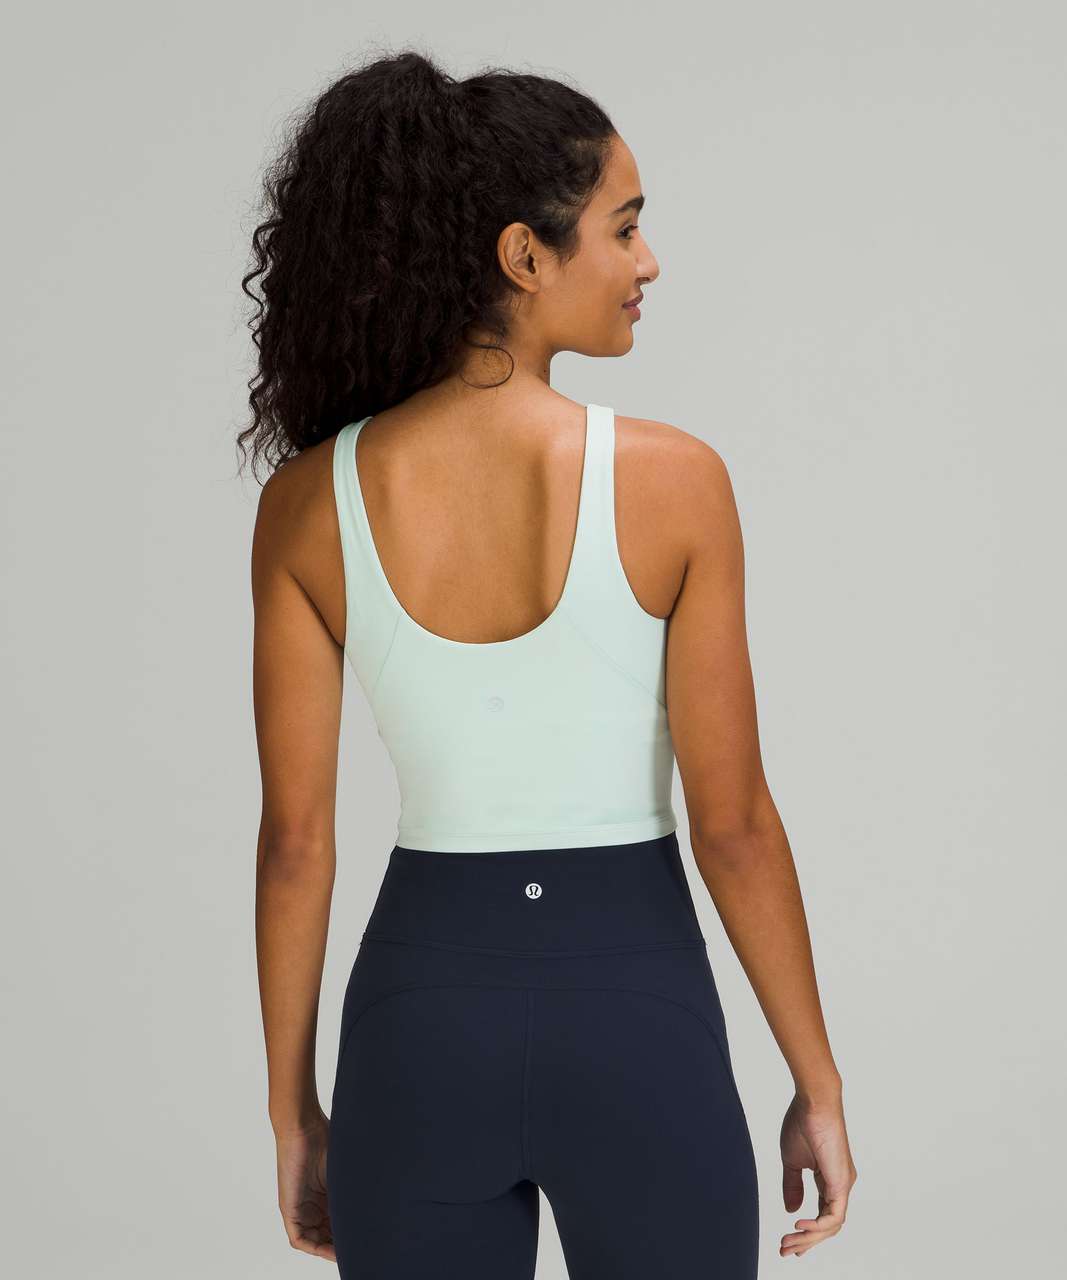 I was able to score the wild mint high neck align tank on markdown in store  when it's full priced online! : r/lululemon